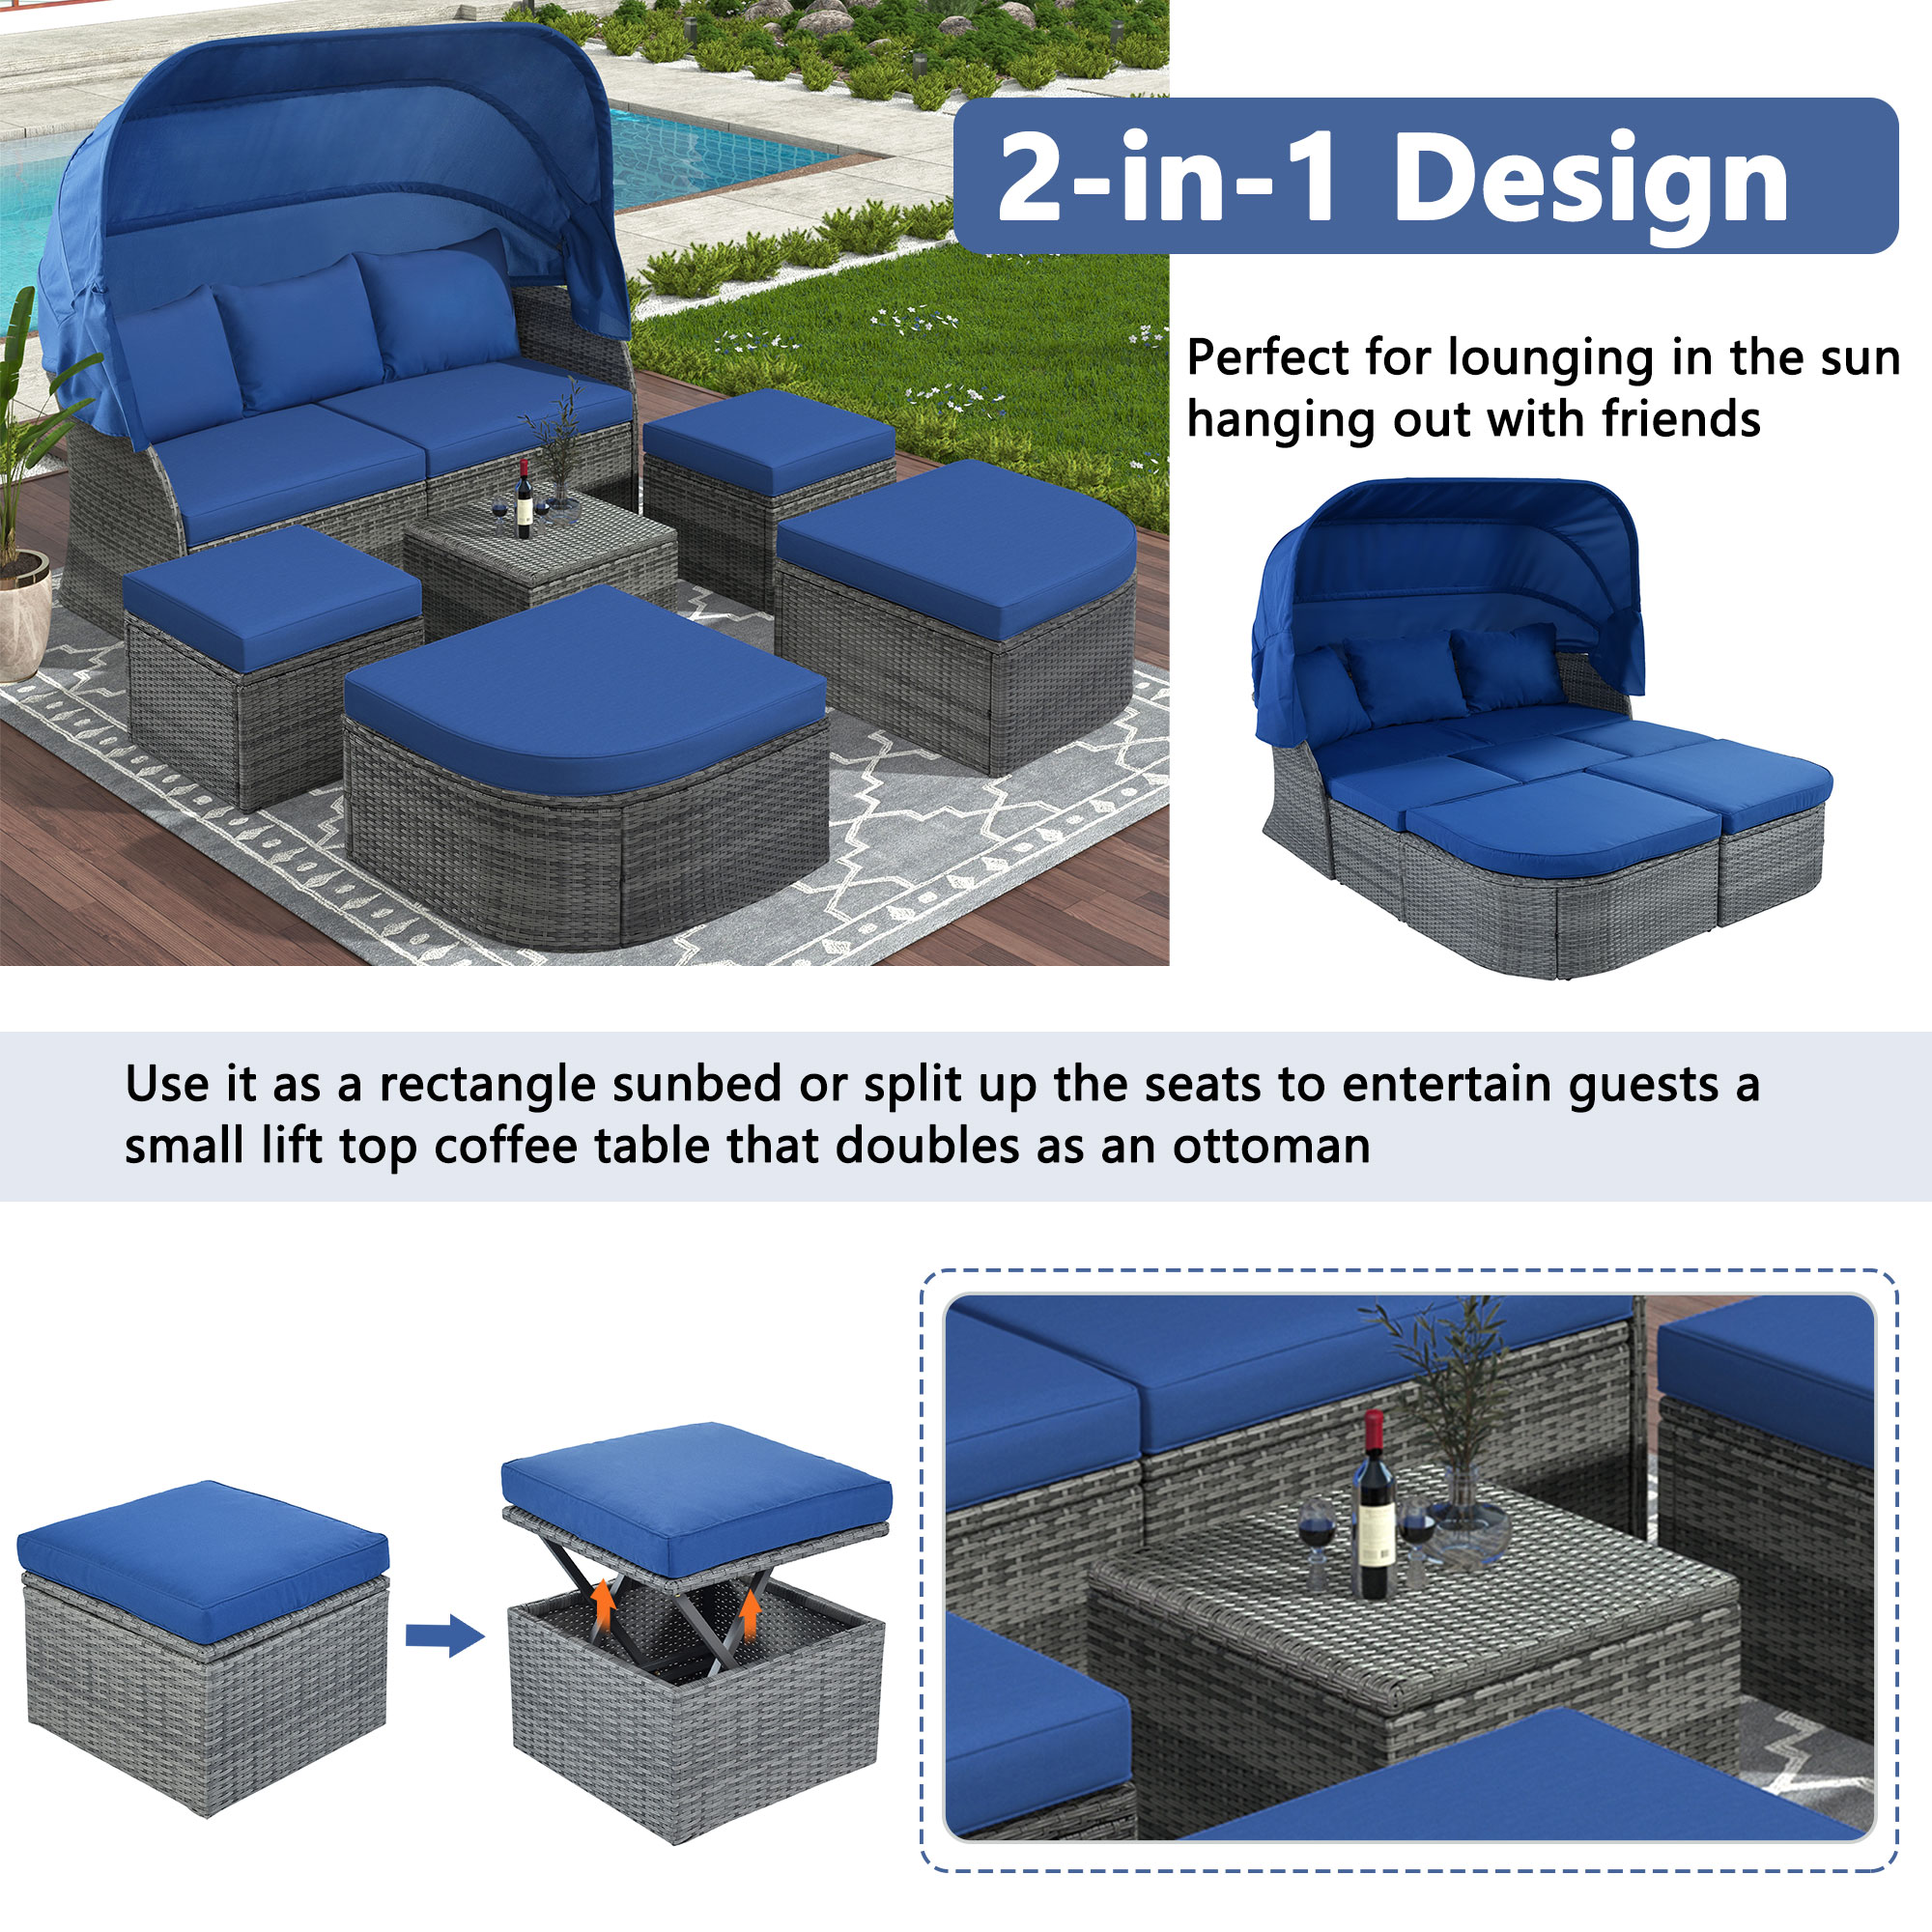 Outdoor Patio Daybed Sunbed, Rattan Lounge With Retractable Canopy, Wicker Rattan Separated Seating Sectional Sofa with Ottoman or Lift Top Coffee Table for Patio Lawn Garden, Blue - image 5 of 7